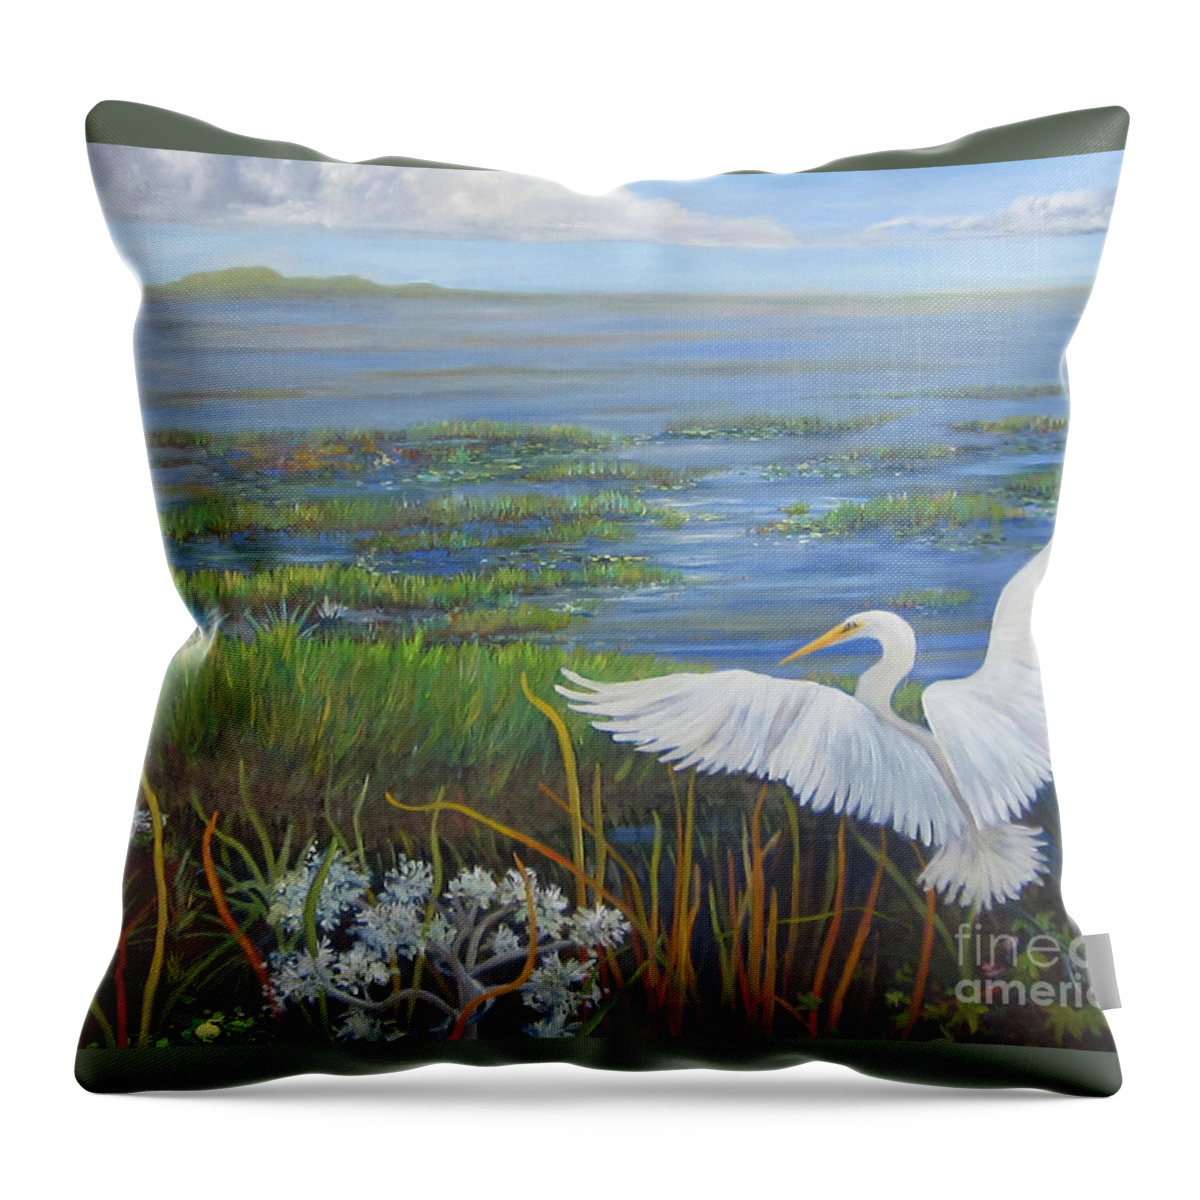 Egret Throw Pillow featuring the painting Everglades Egret by Anne Marie Brown